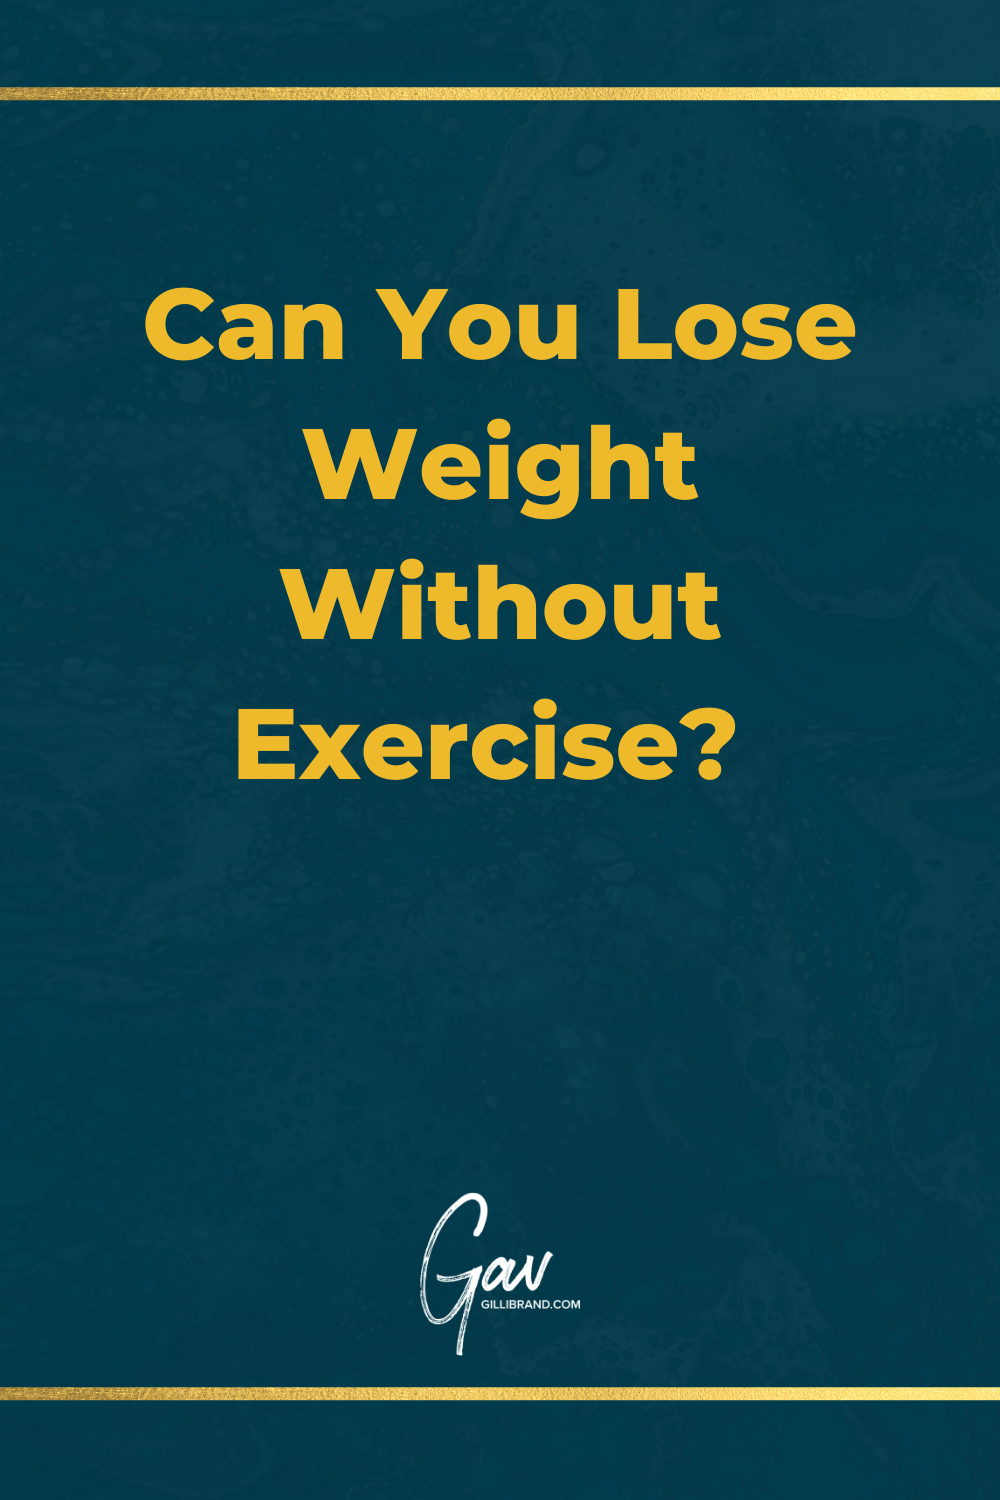 Featured image for “Can you lose weight without exercise?”